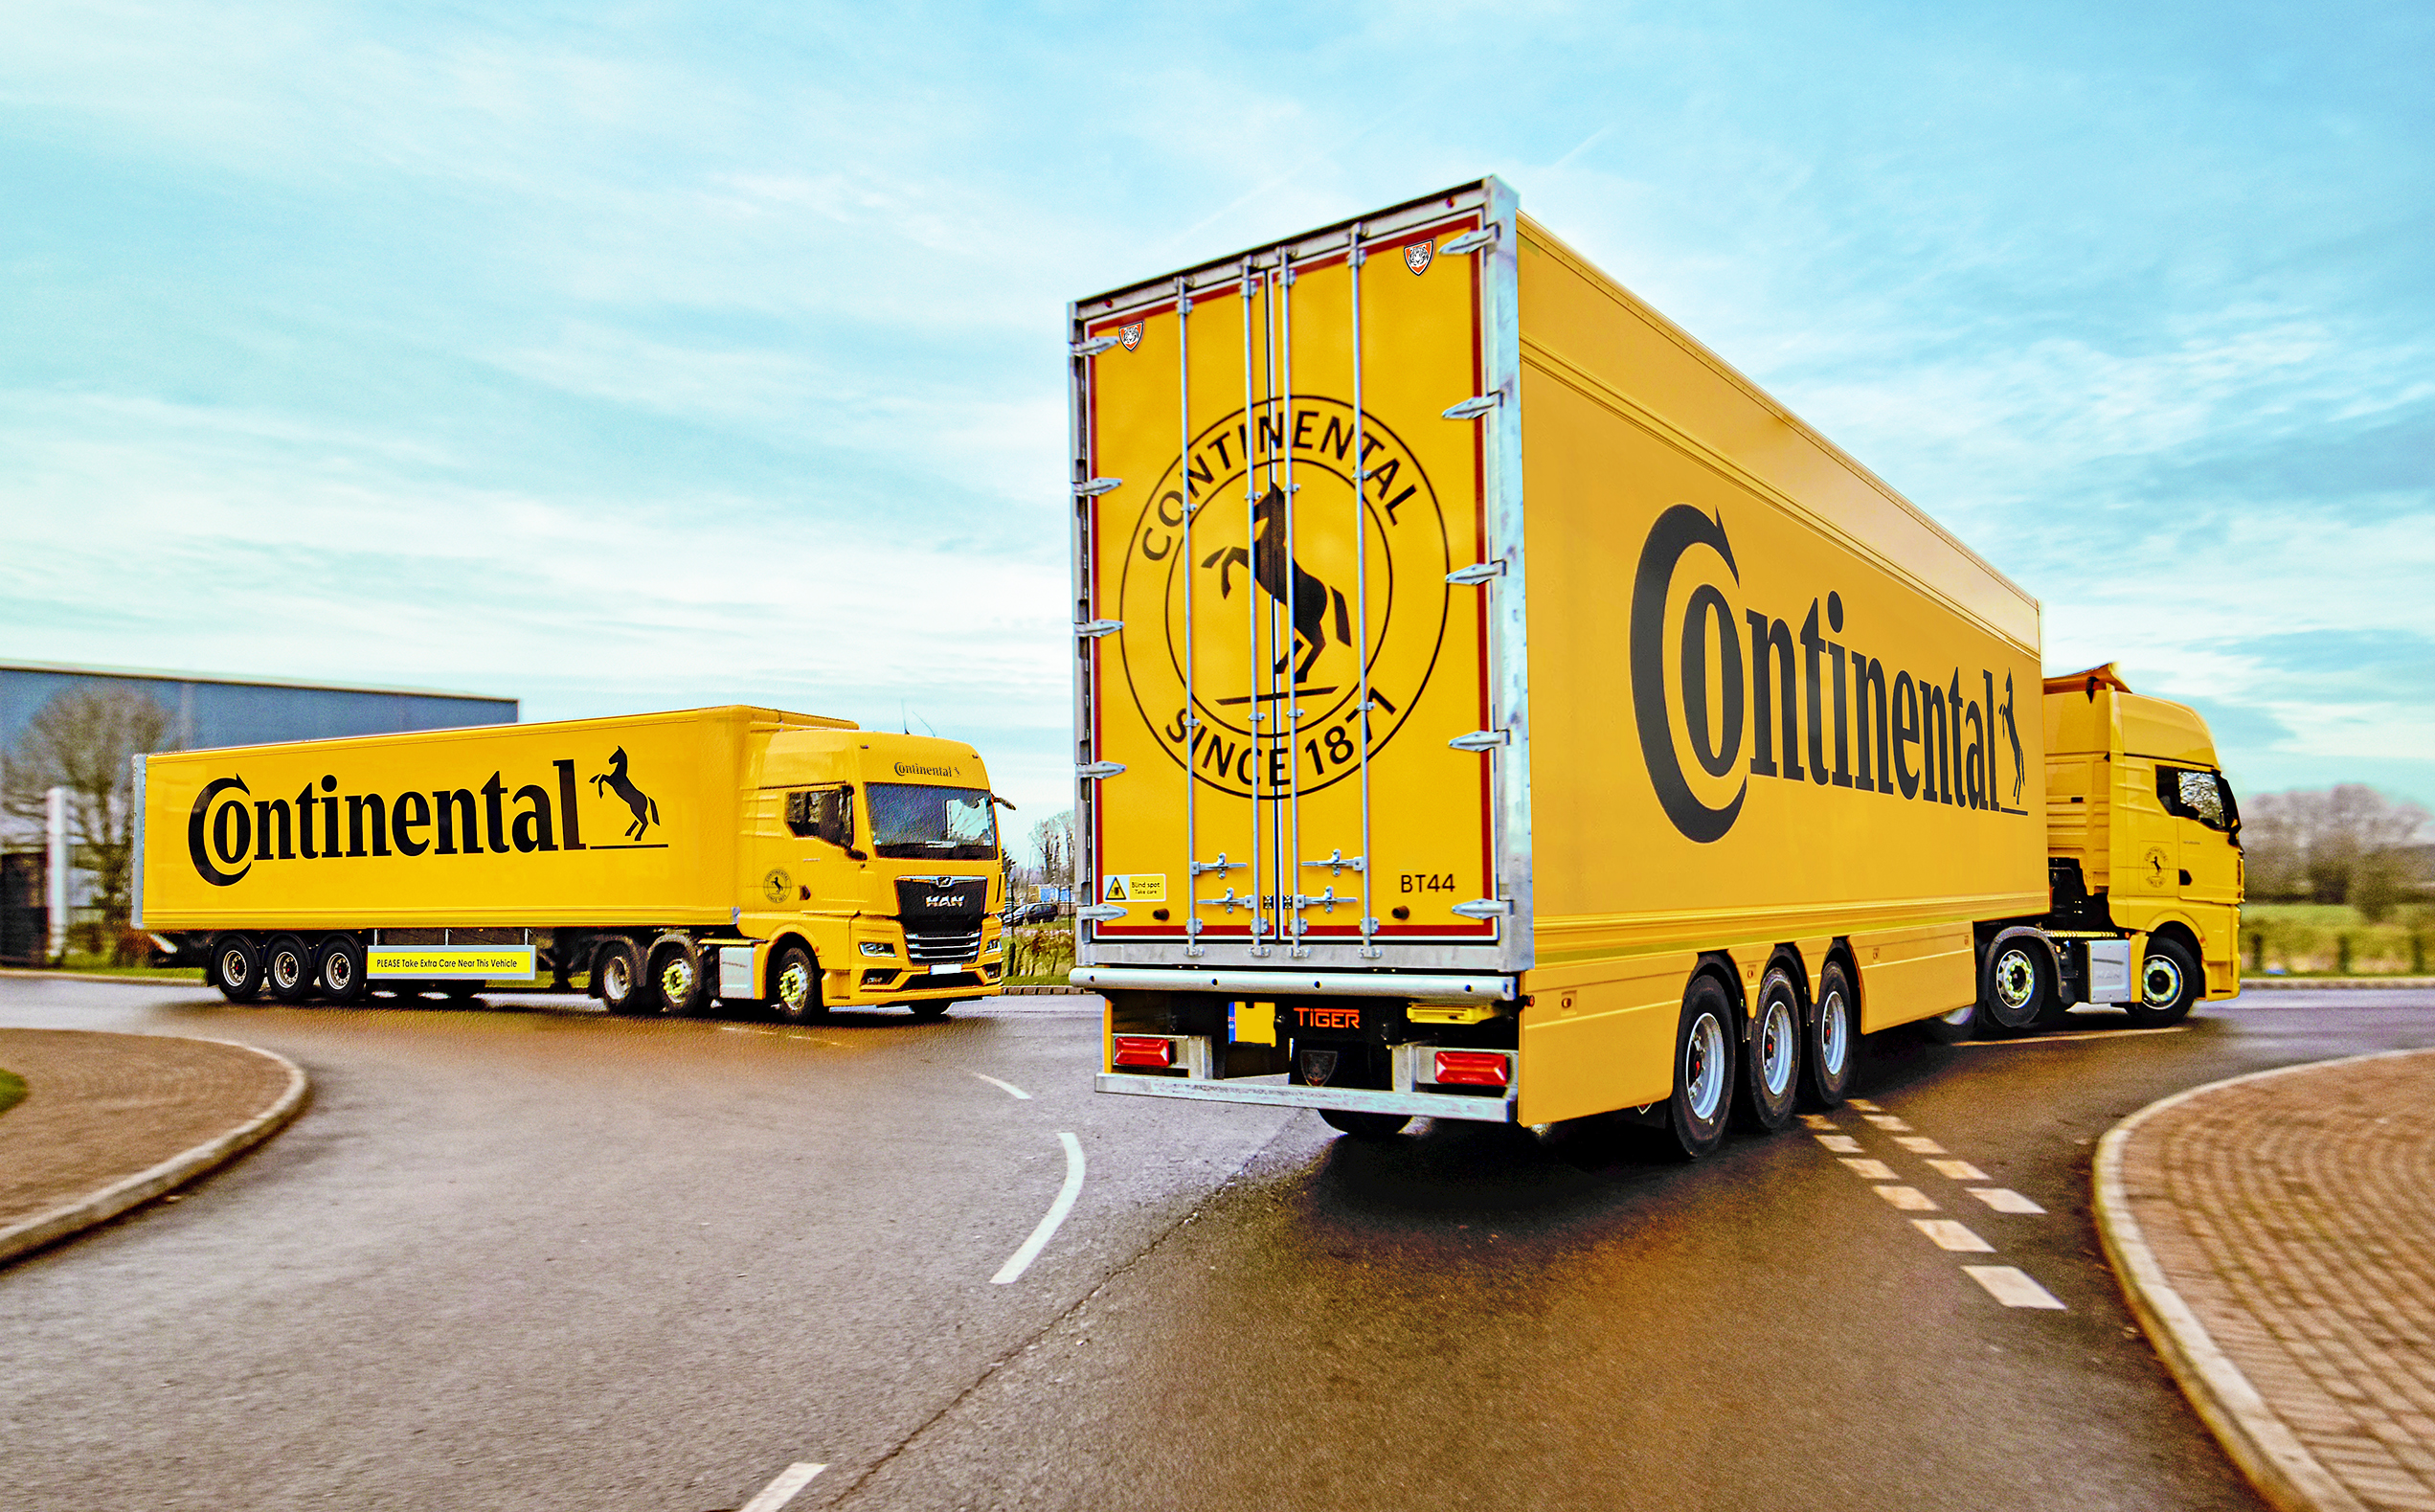 Additional bespoke box van semi-trailers from Tiger join Continental tyres'  UK fleet